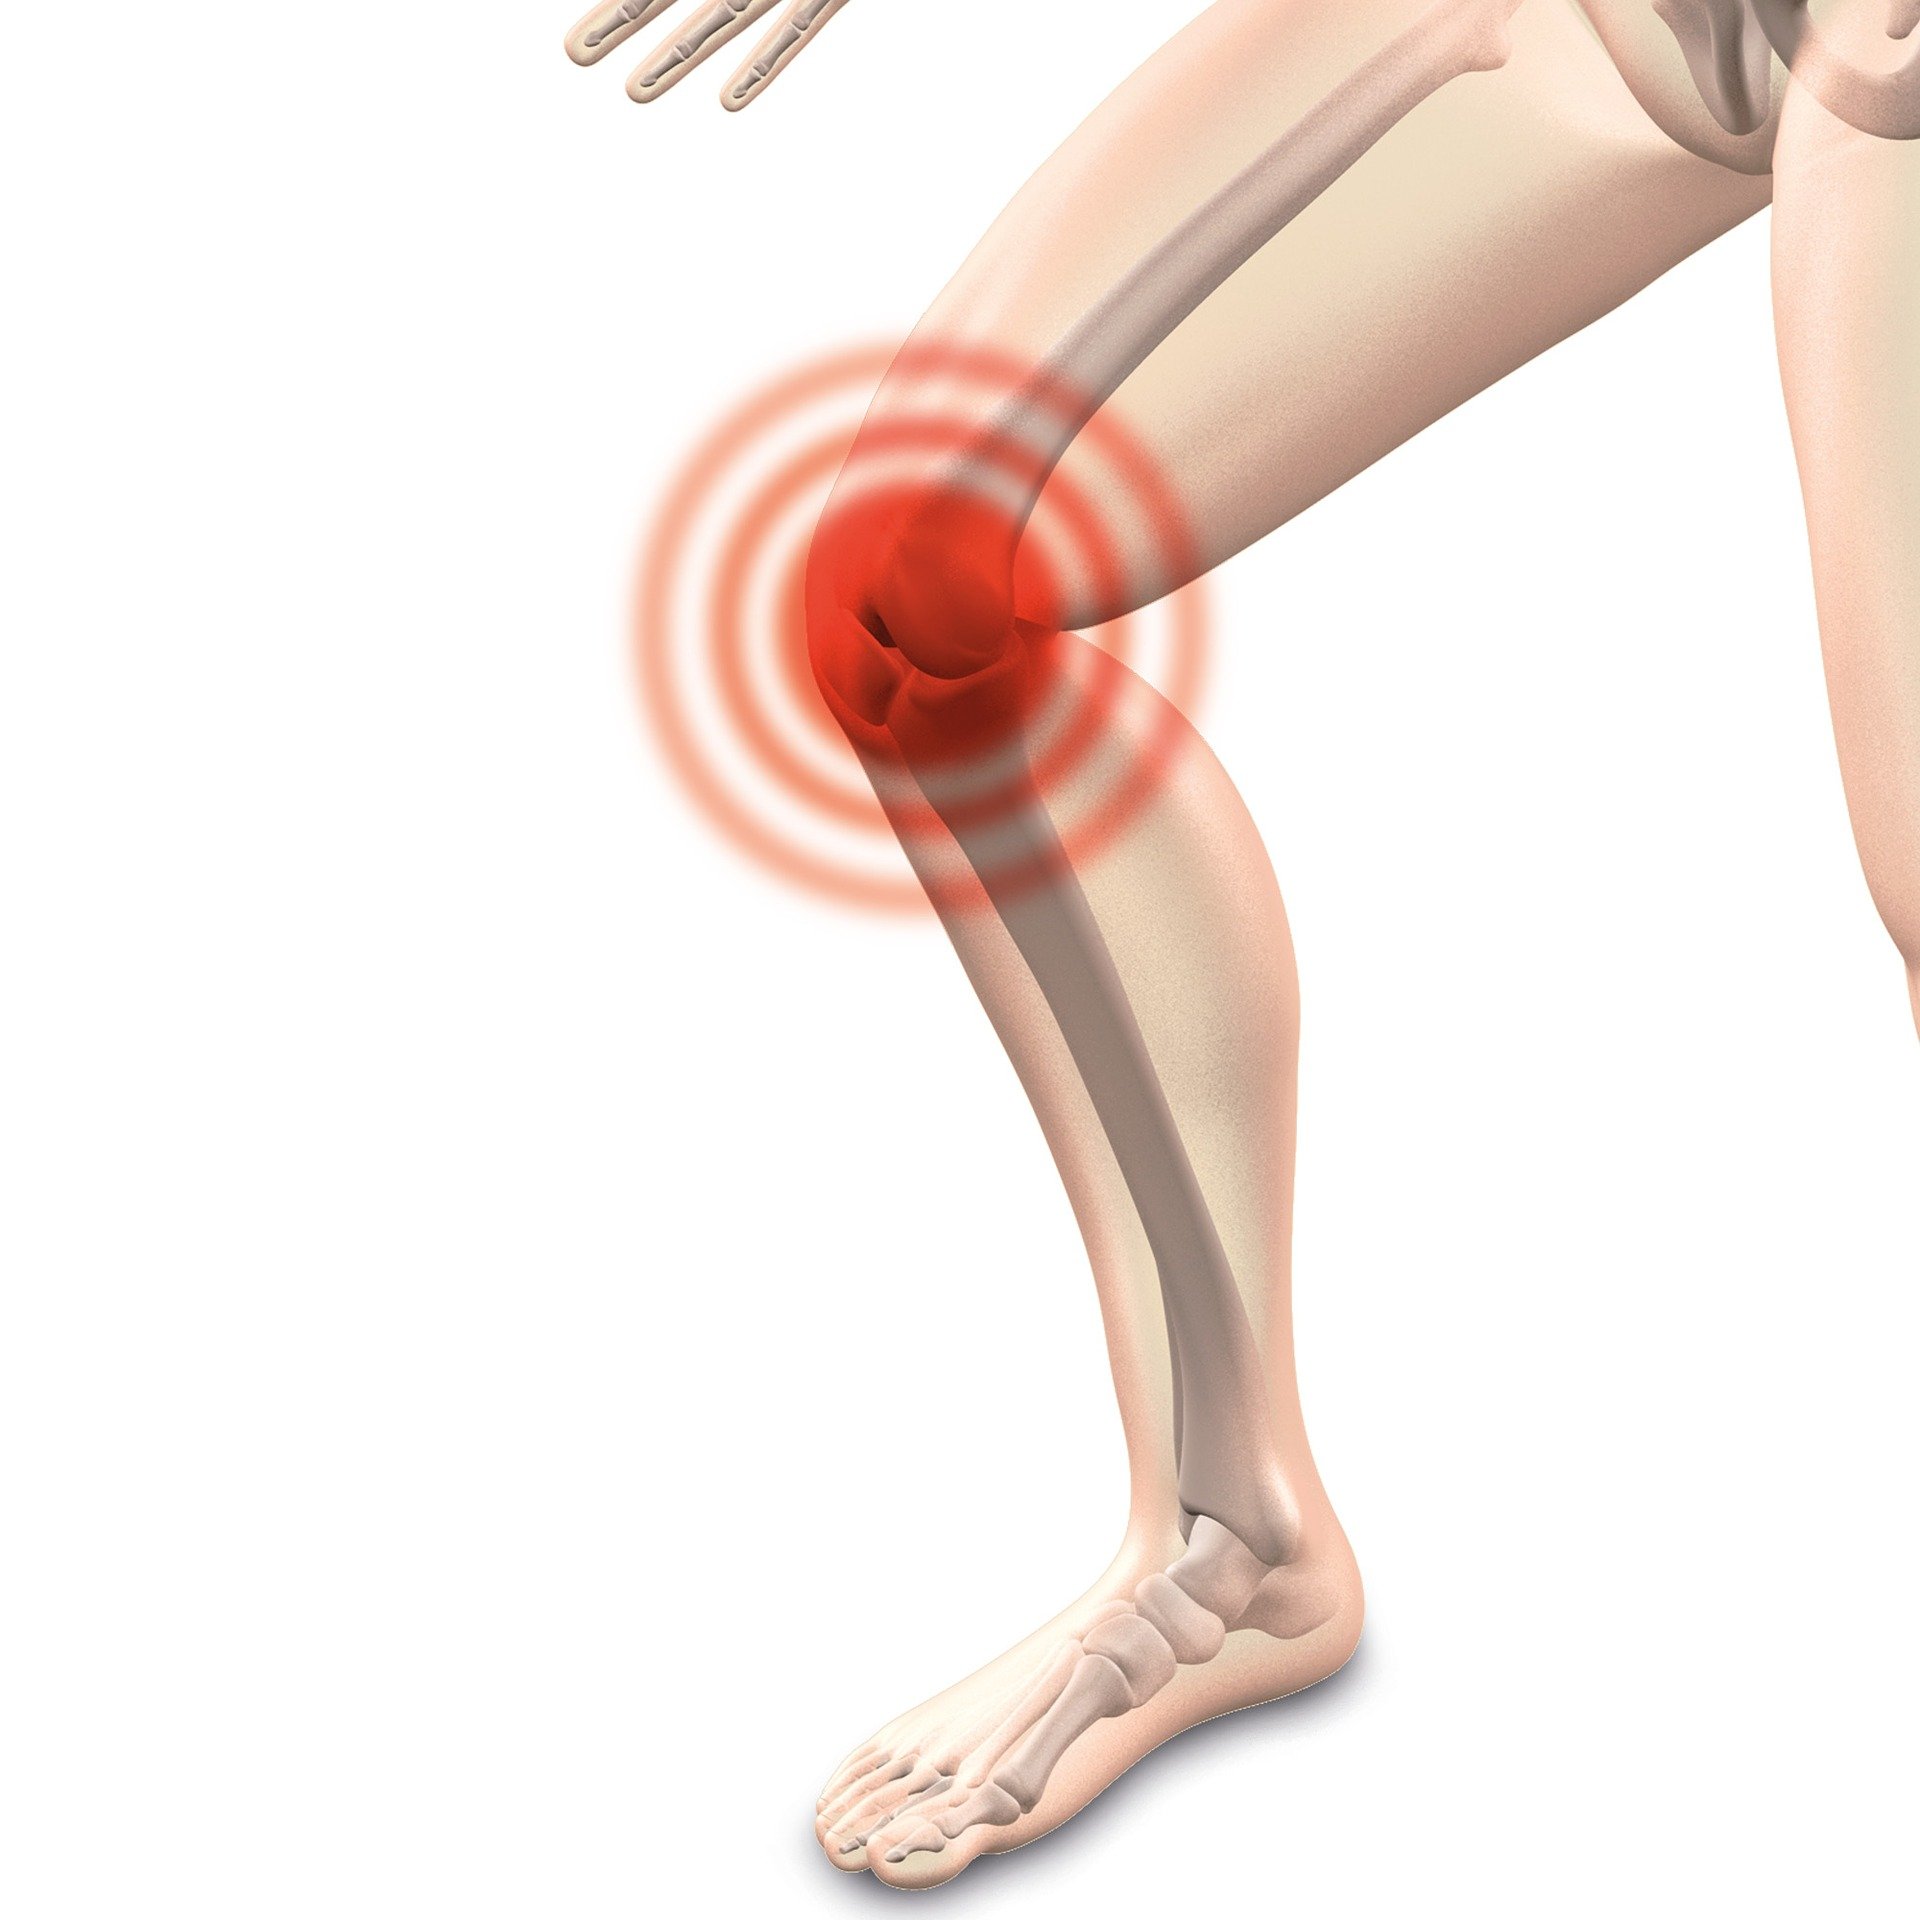 Can I get Social Security Disability for my patellar tendinitis?